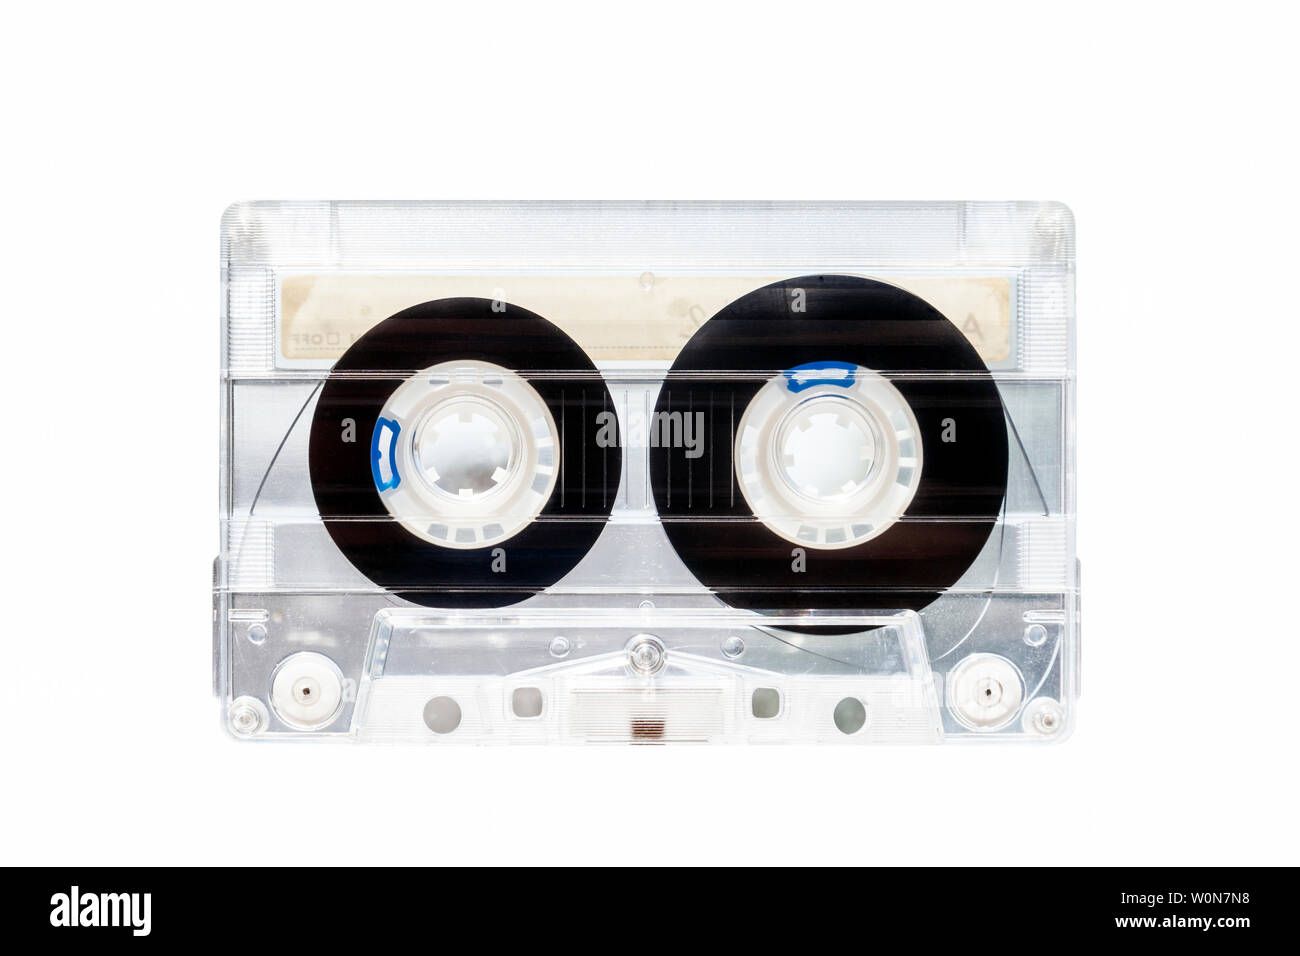 Transparent plastic C90 compact cassette audio tape isoltaed against a white background Stock Photo